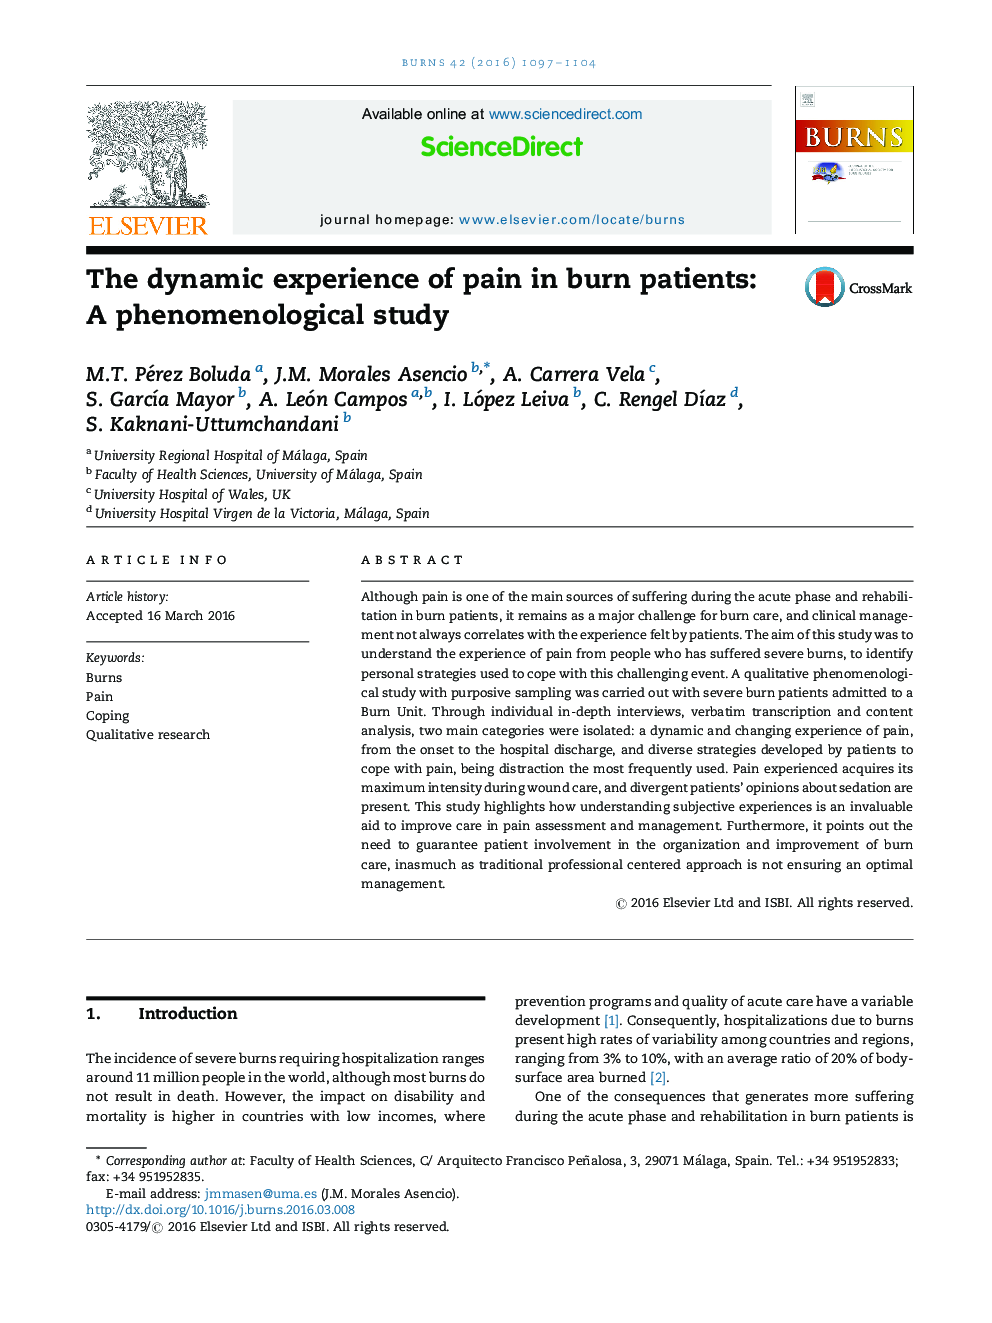 The dynamic experience of pain in burn patients: A phenomenological study